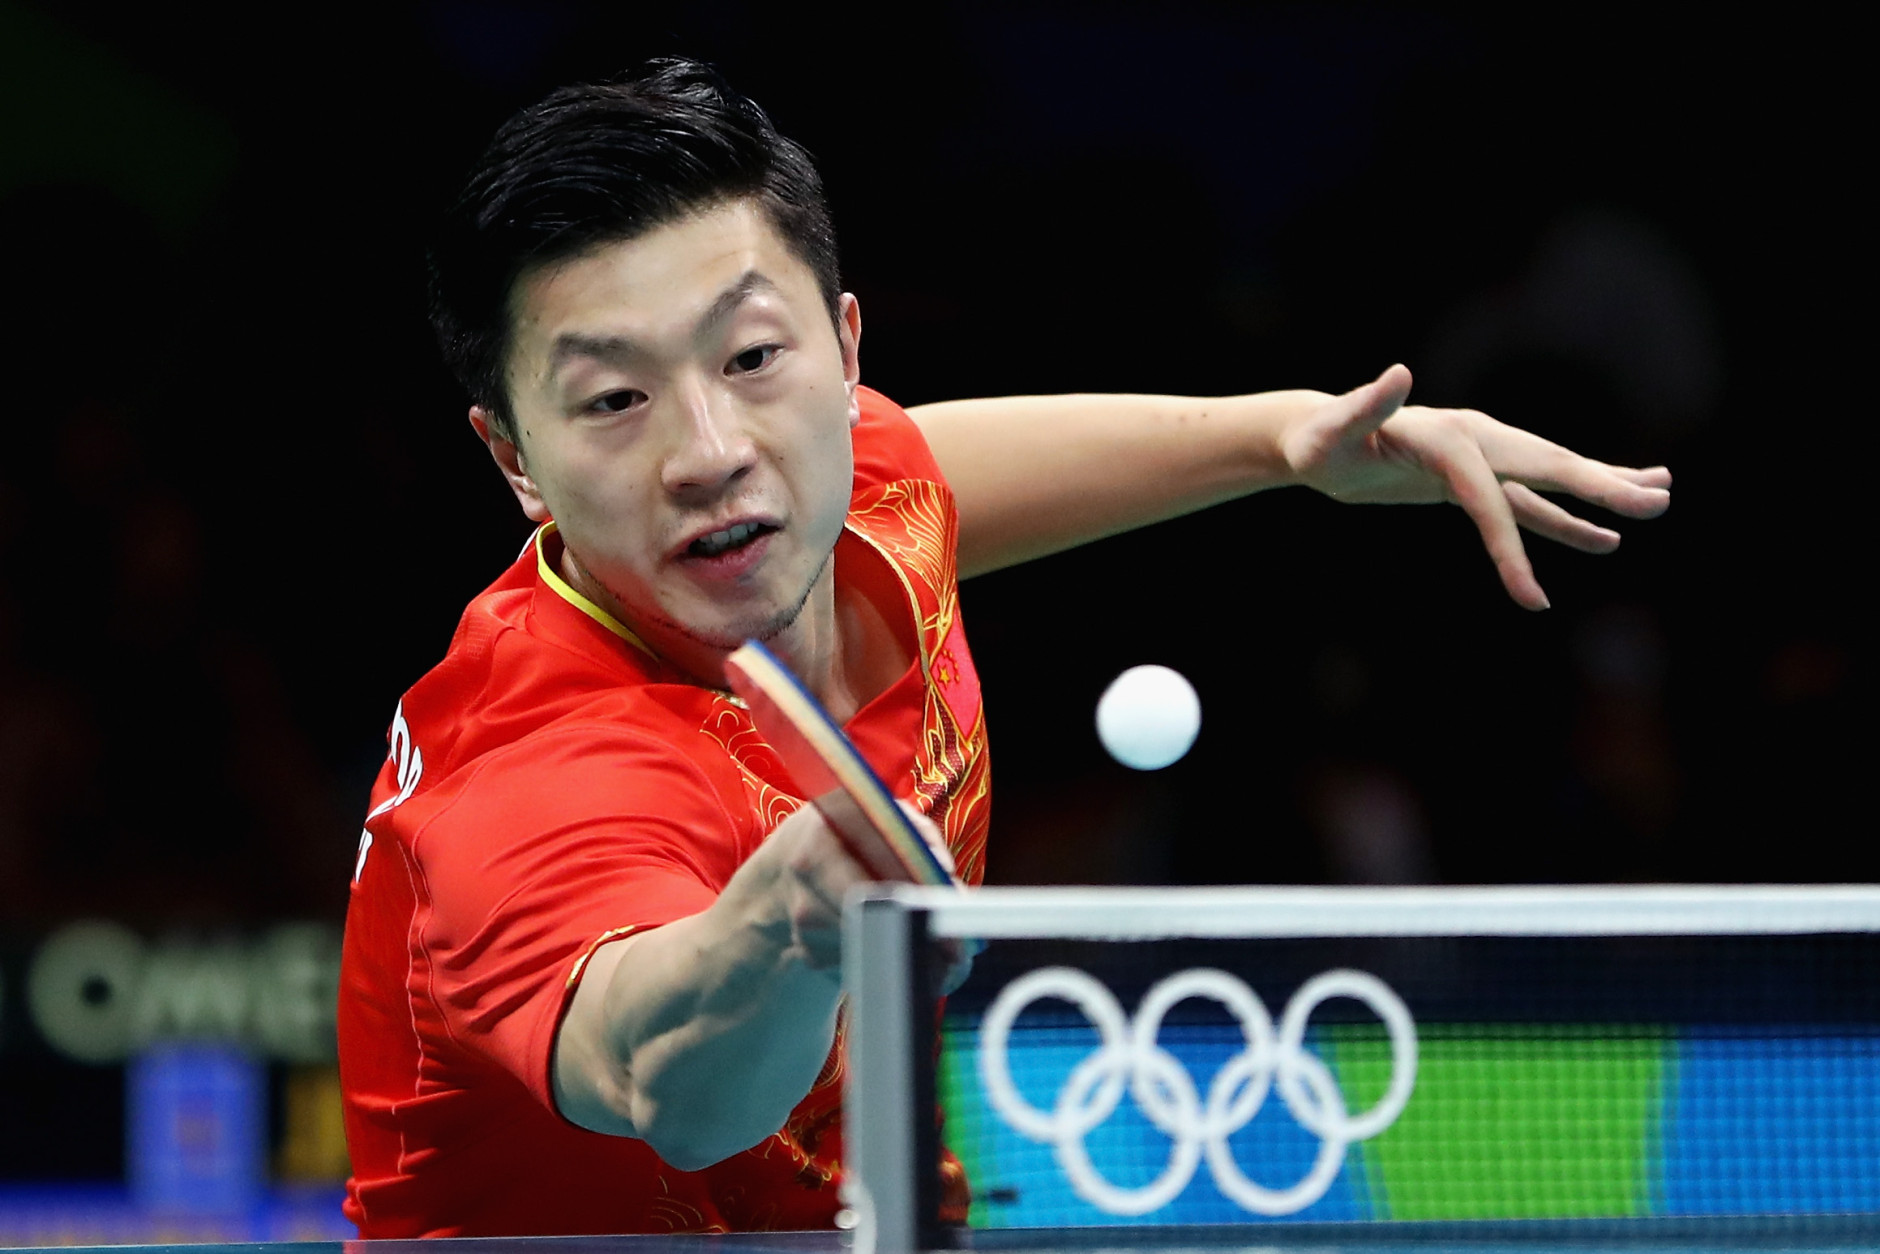 RIO DE JANEIRO, BRAZIL - AUGUST 17:  Long Ma of China competes during the Men's Table Tennis gold medal match against Maharu Yoshimura of Japan at Riocentro - Pavilion 3 on Day 12 of the Rio 2016 Olympic Games  on August 17, 2016 in Rio de Janeiro, Brazil.  (Photo by Phil Walter/Getty Images)